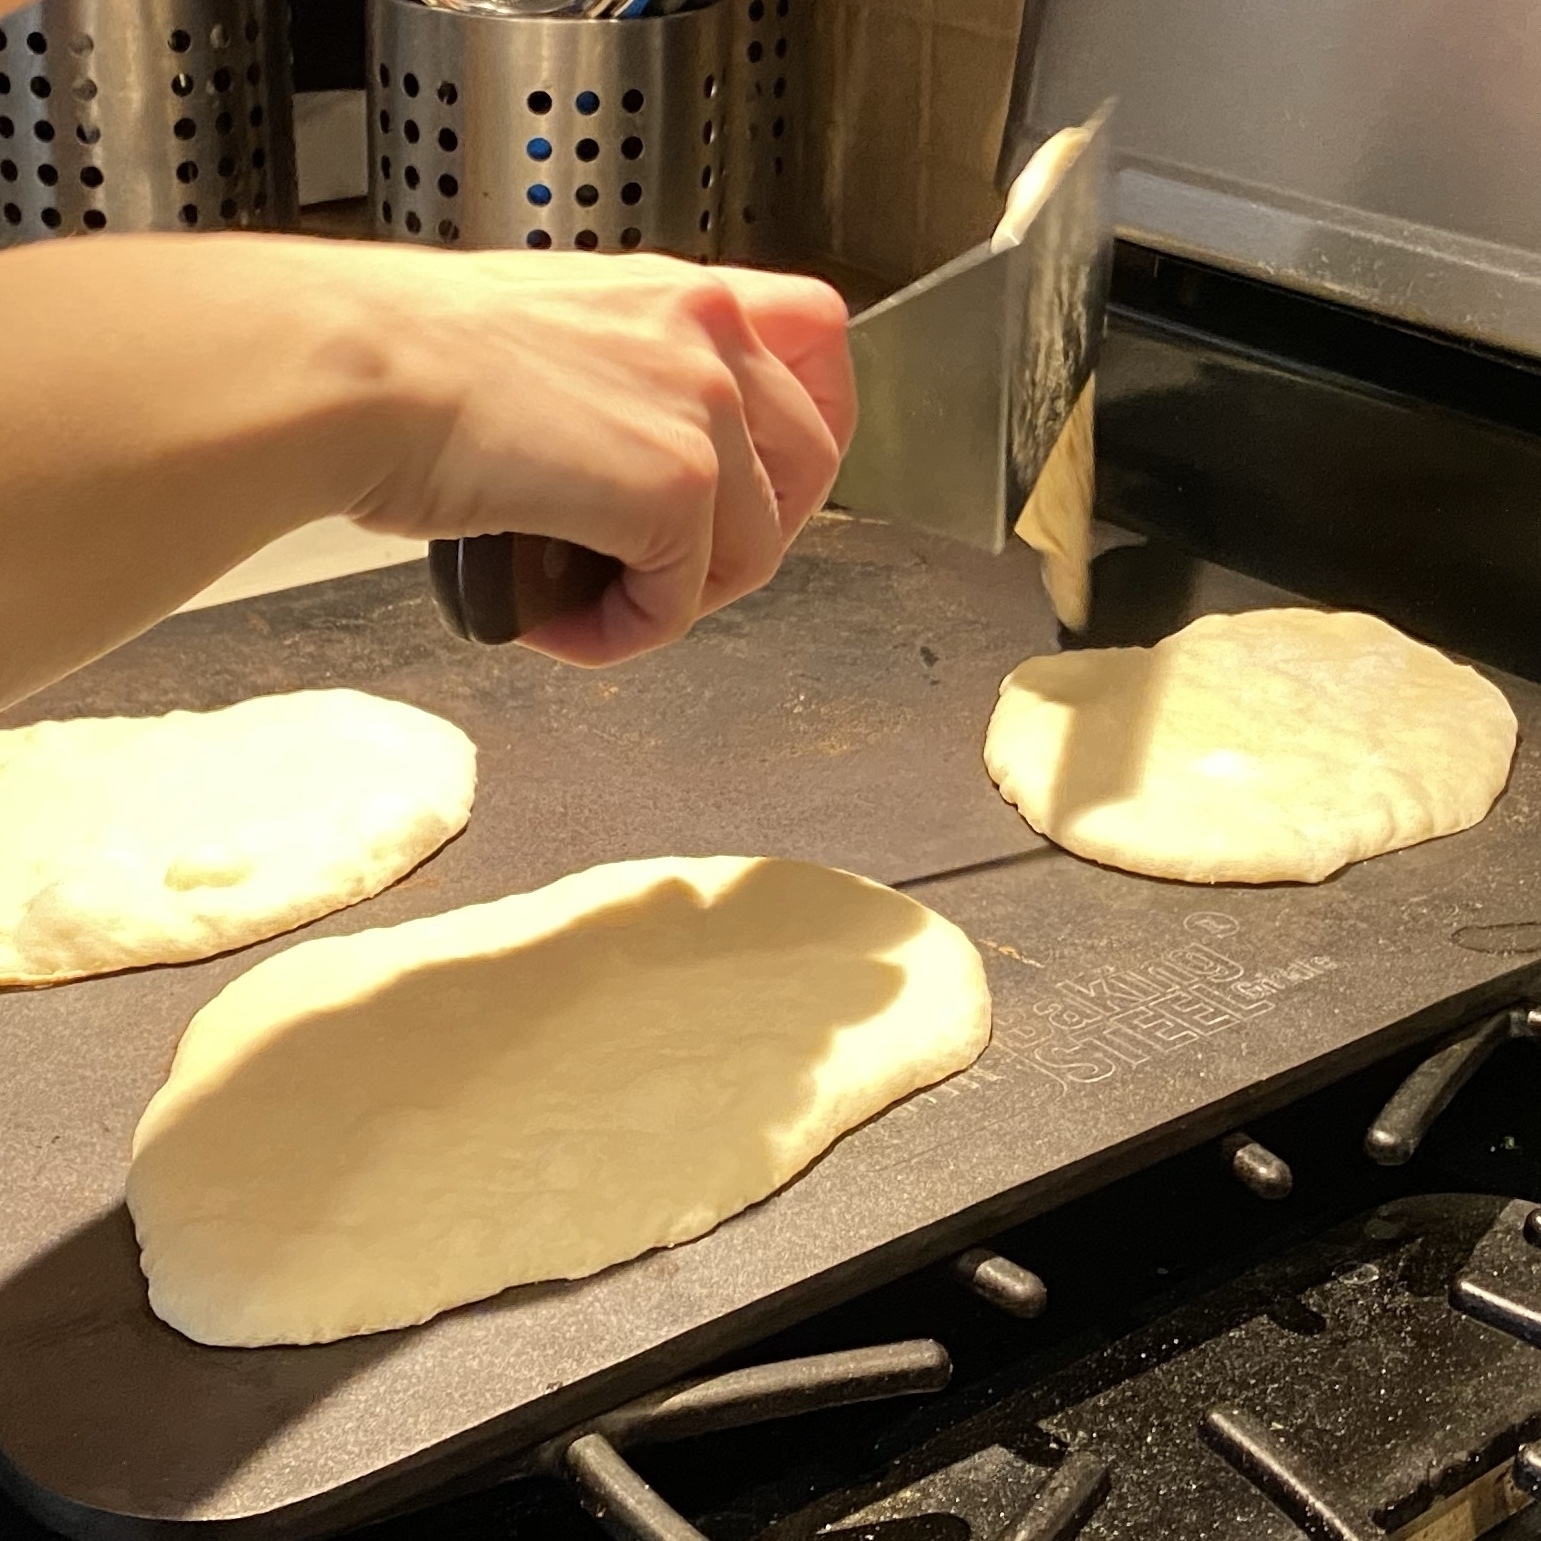 cooking naan on a baking steel